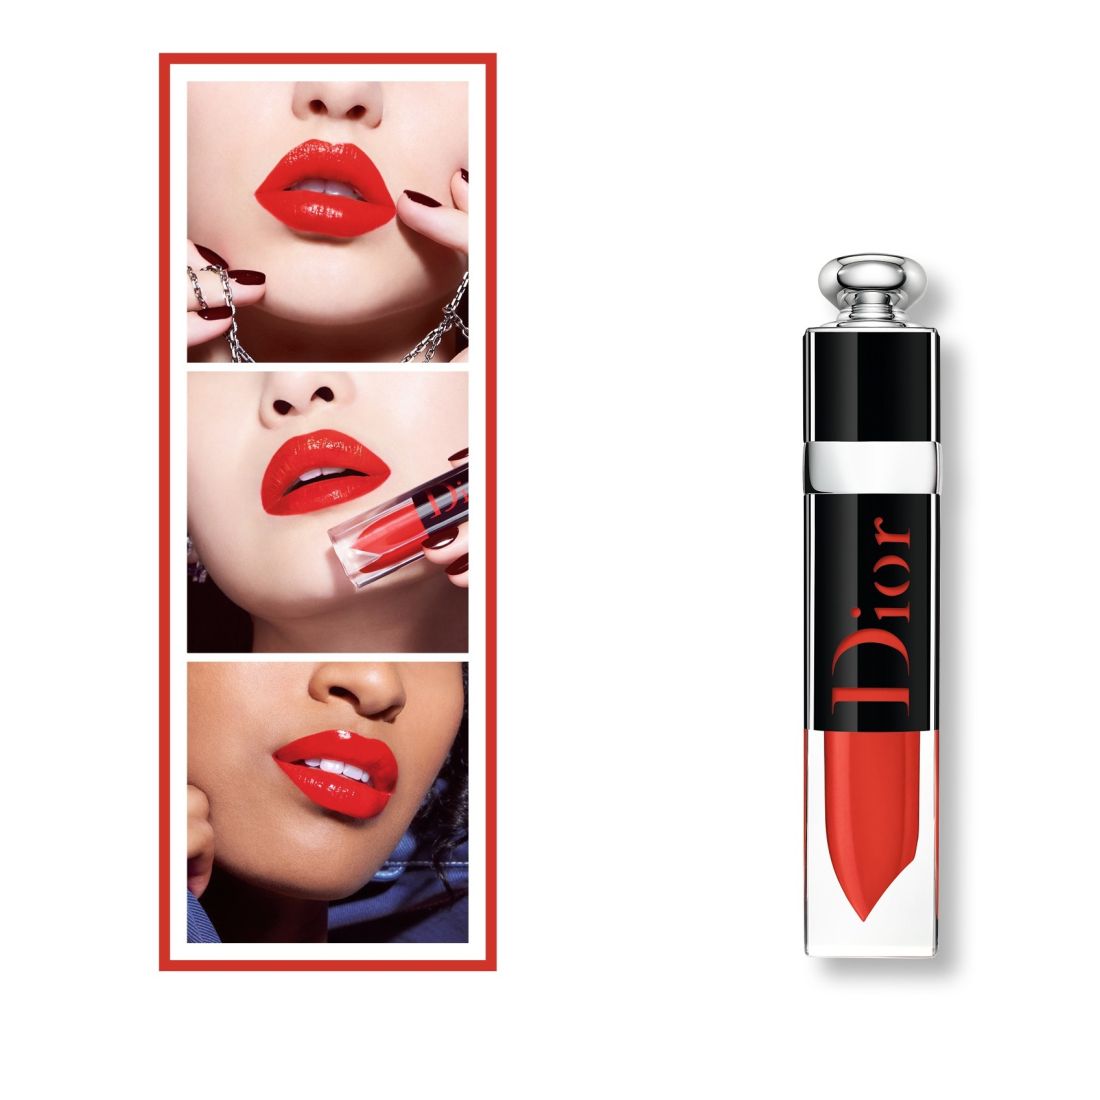 Takashimaya Department Store  Discover the secrets to Plump Tint and  Shine with the new Dior Addict Lacquer Plump The First Plumping Lacquered  Lip Ink by Dior Its secret An oil and